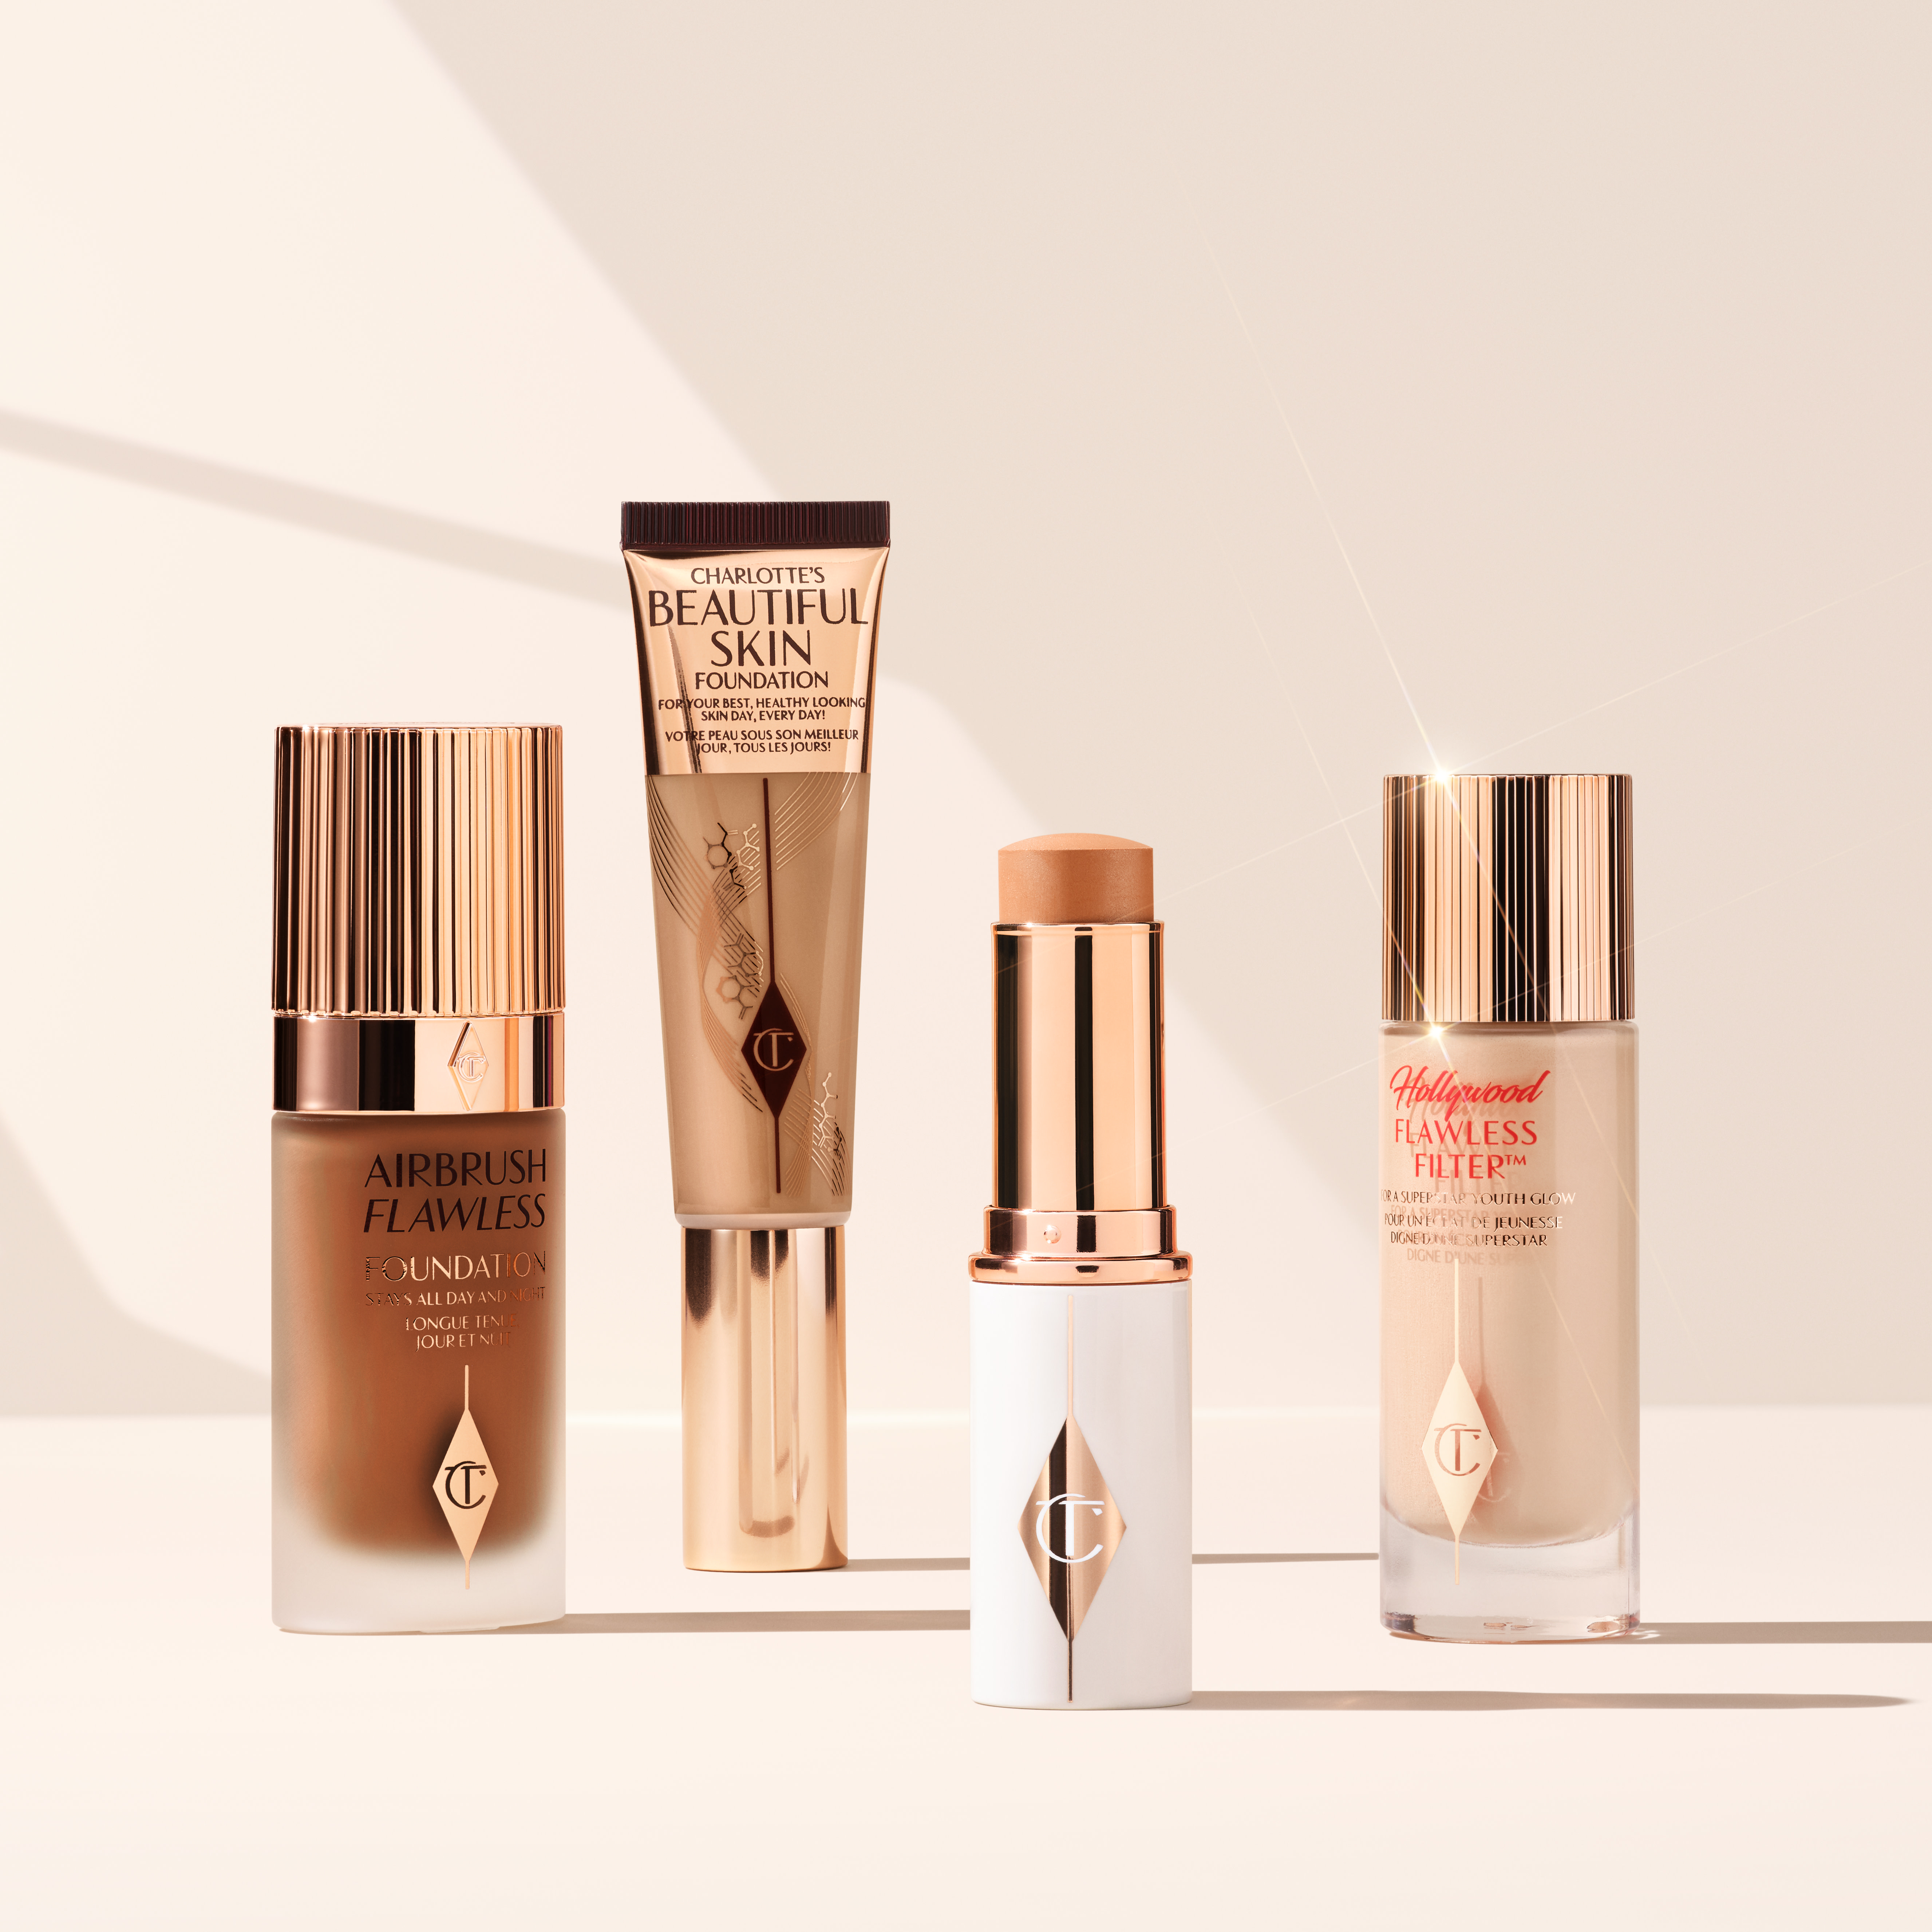 All four of Charlotte's foundations helping you choose the best foundation finish for you